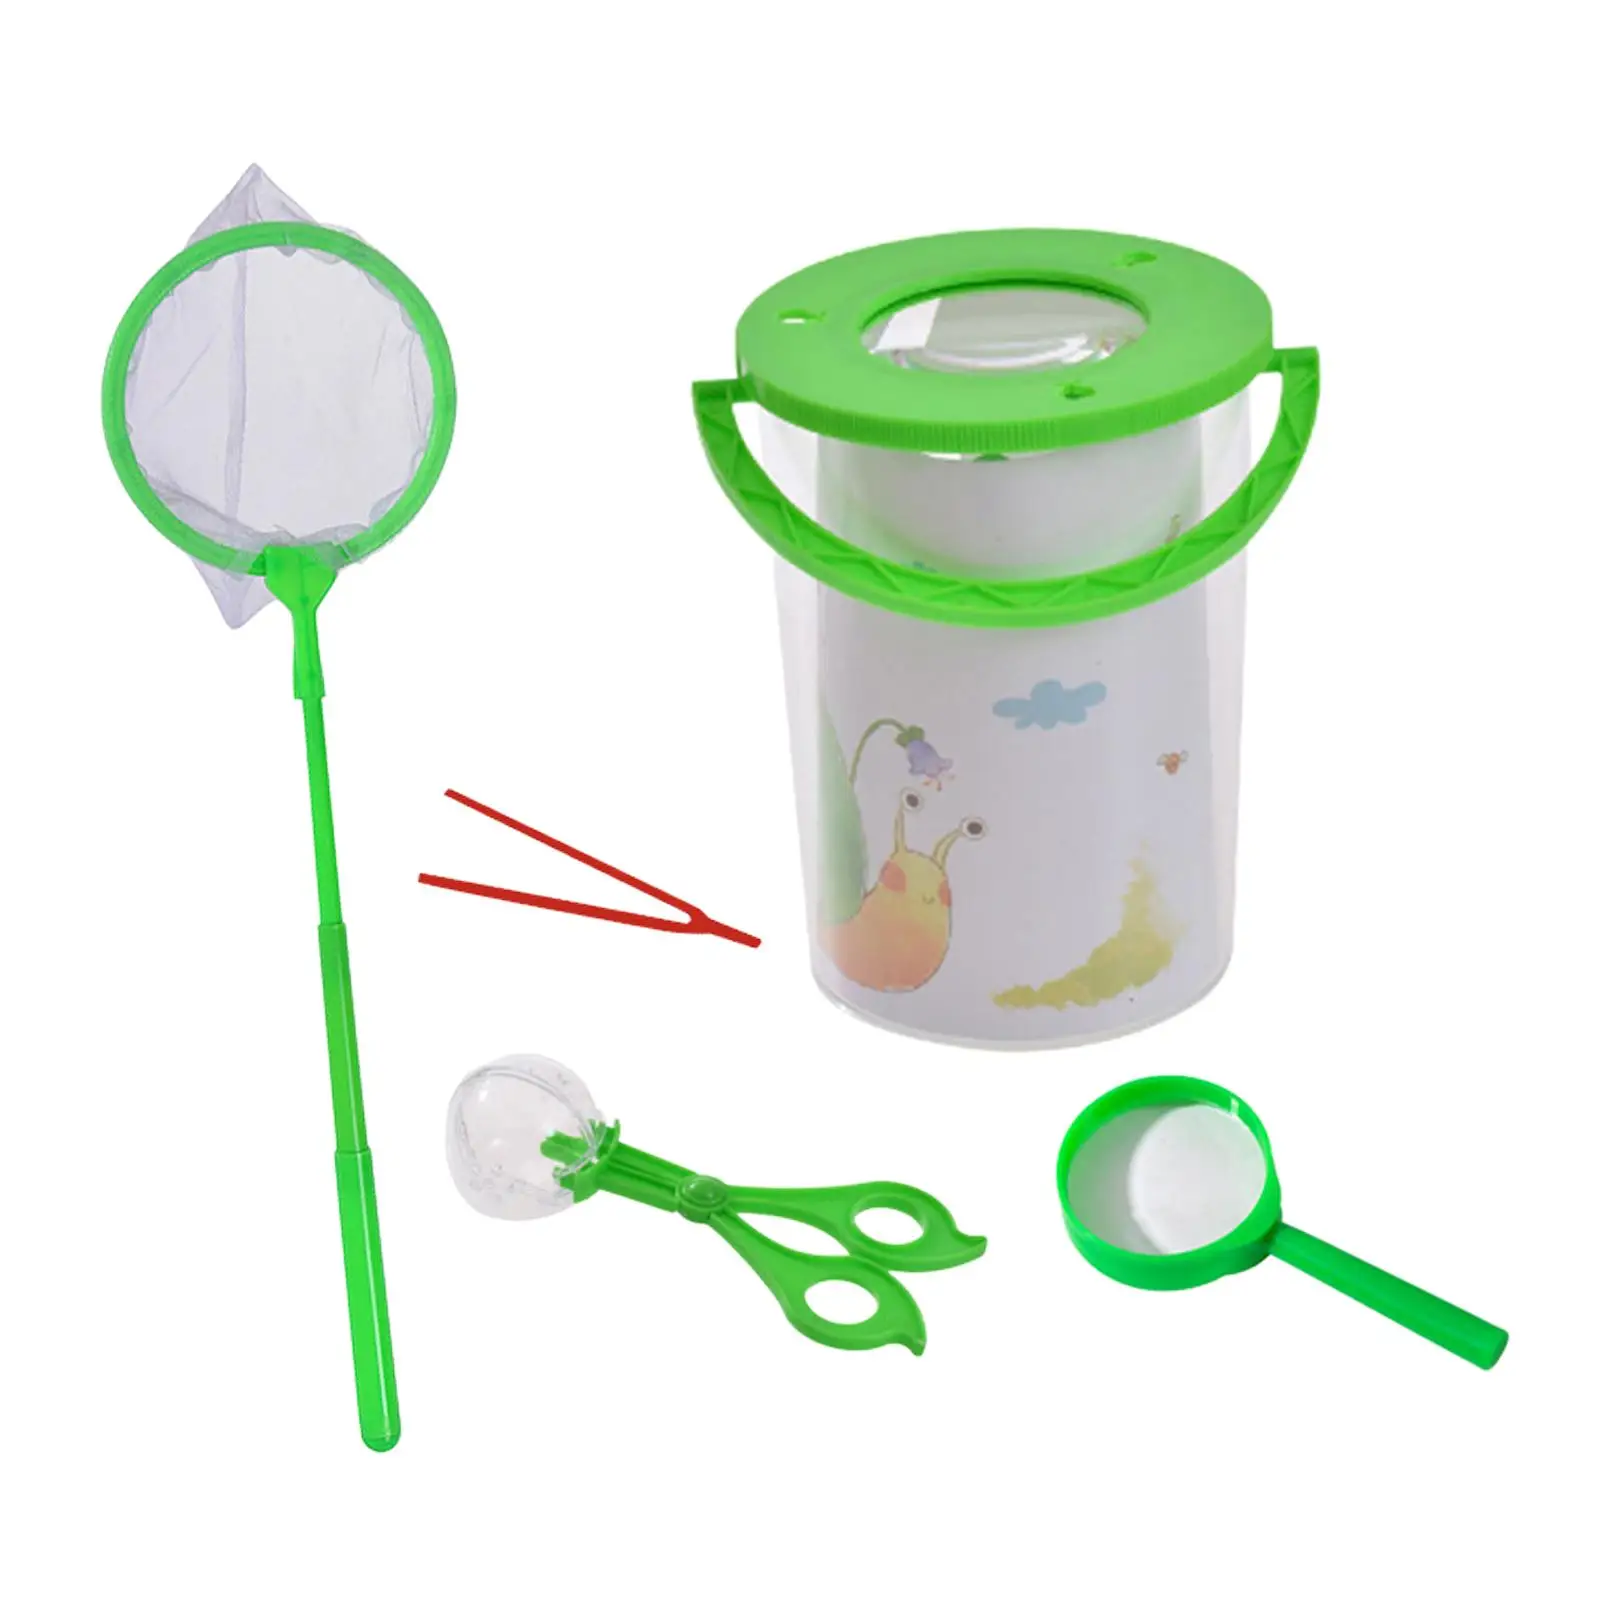 Insect Catcher Kit Explorer Insect Observation Container for Kids 8 Boys and Girls Camping Adventure